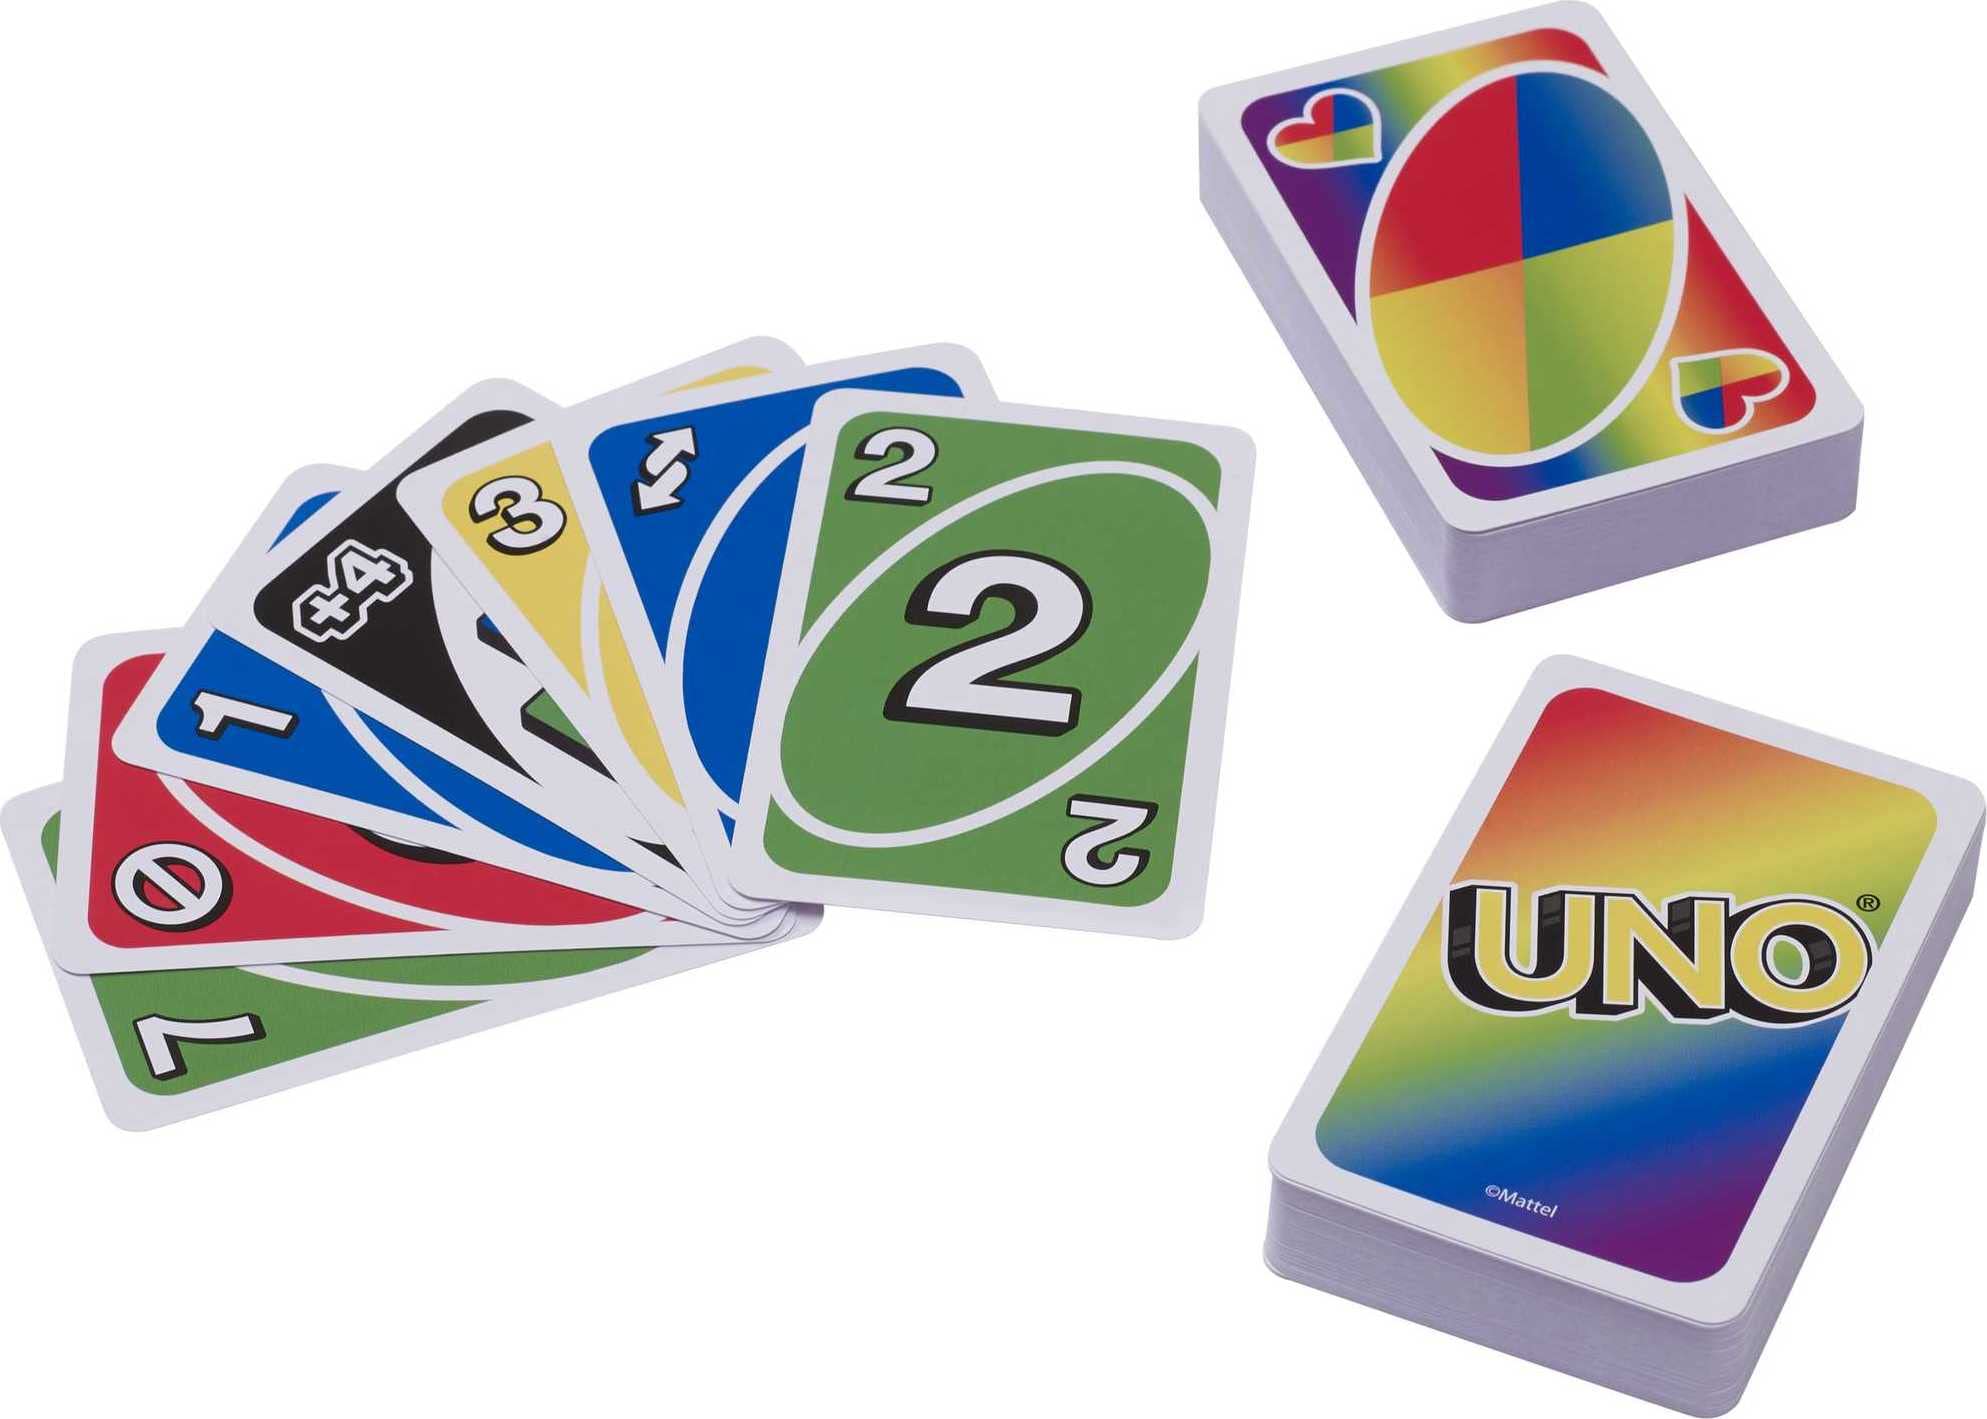 UNO Card Game Play with Pride with It Gets Better Project, Celebrating Lgbtq+ Community in a Collectible Tin Box (Amazon Exclusive)